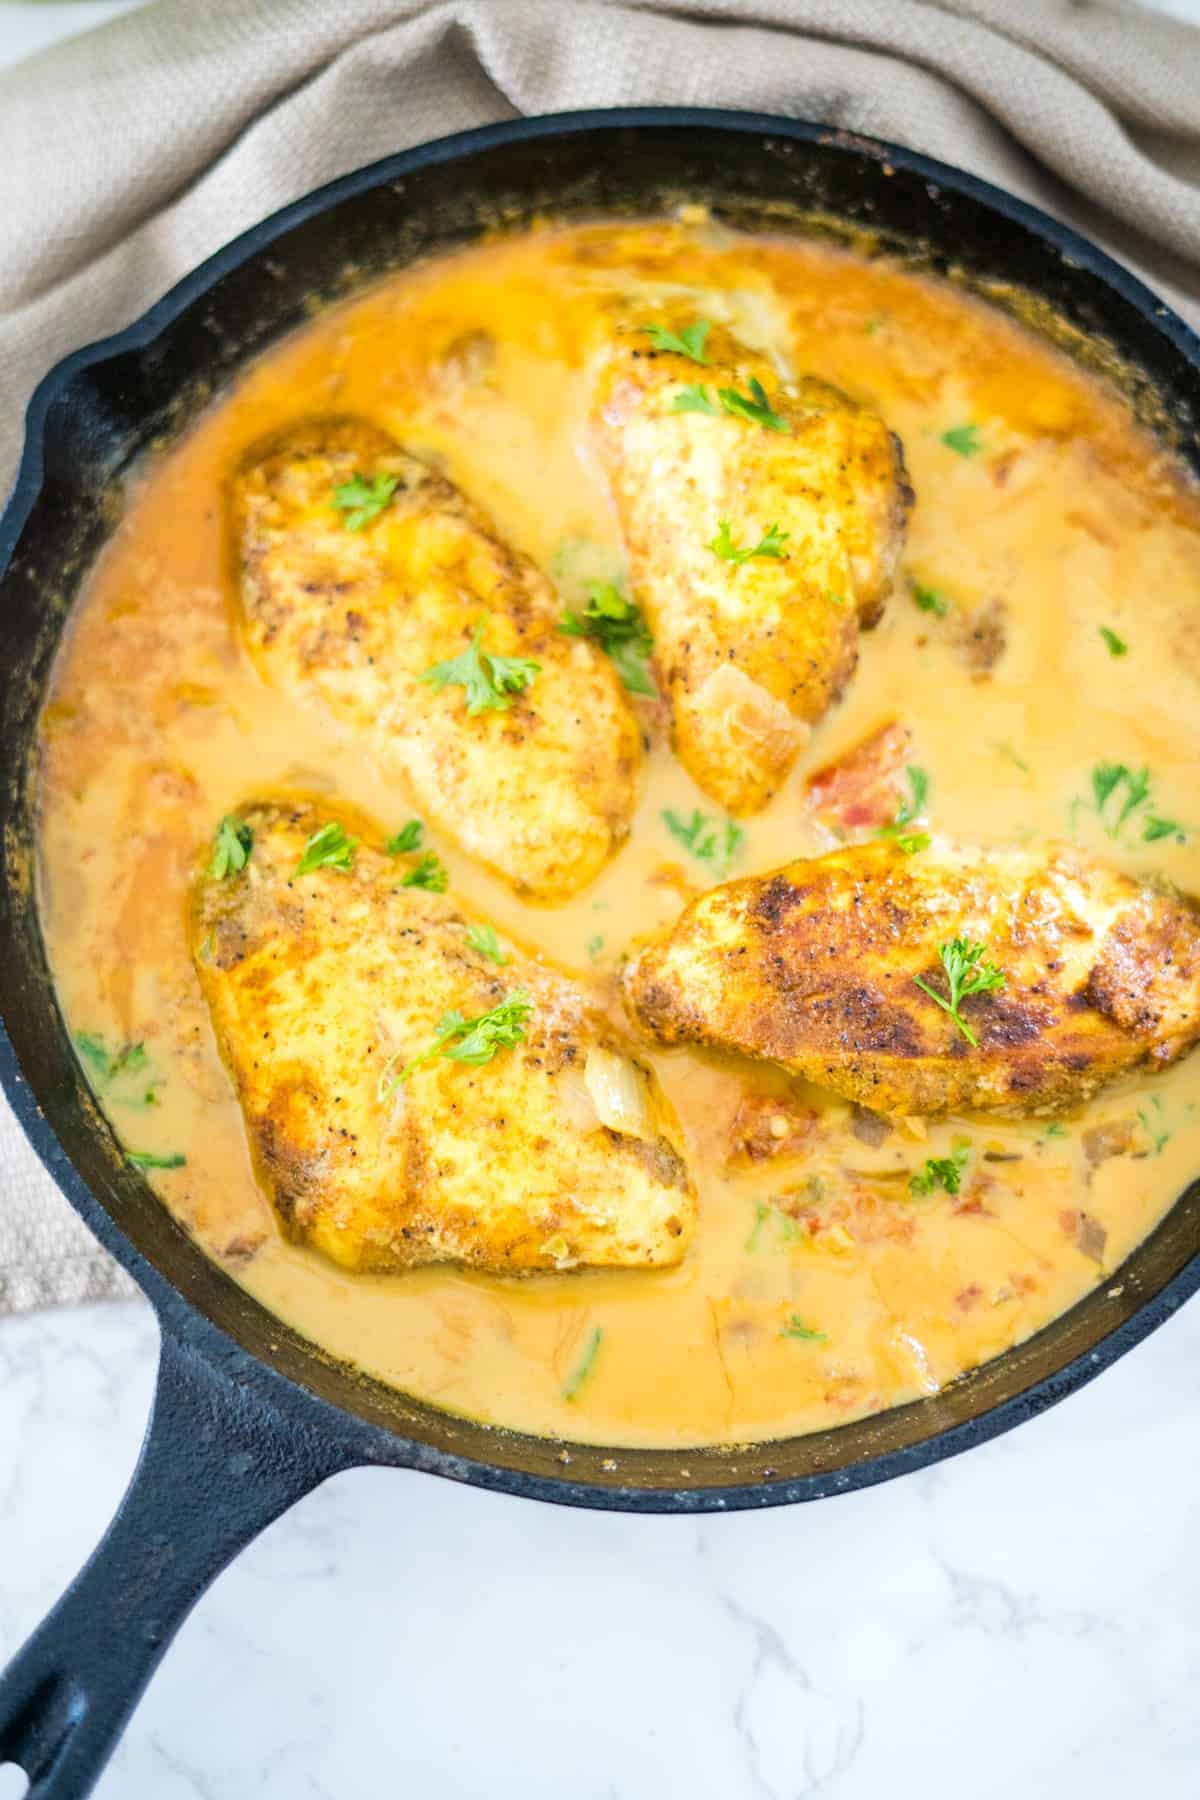 A Brazilian coconut chicken dish cooked in a cast iron skillet, smothered in a creamy sauce.